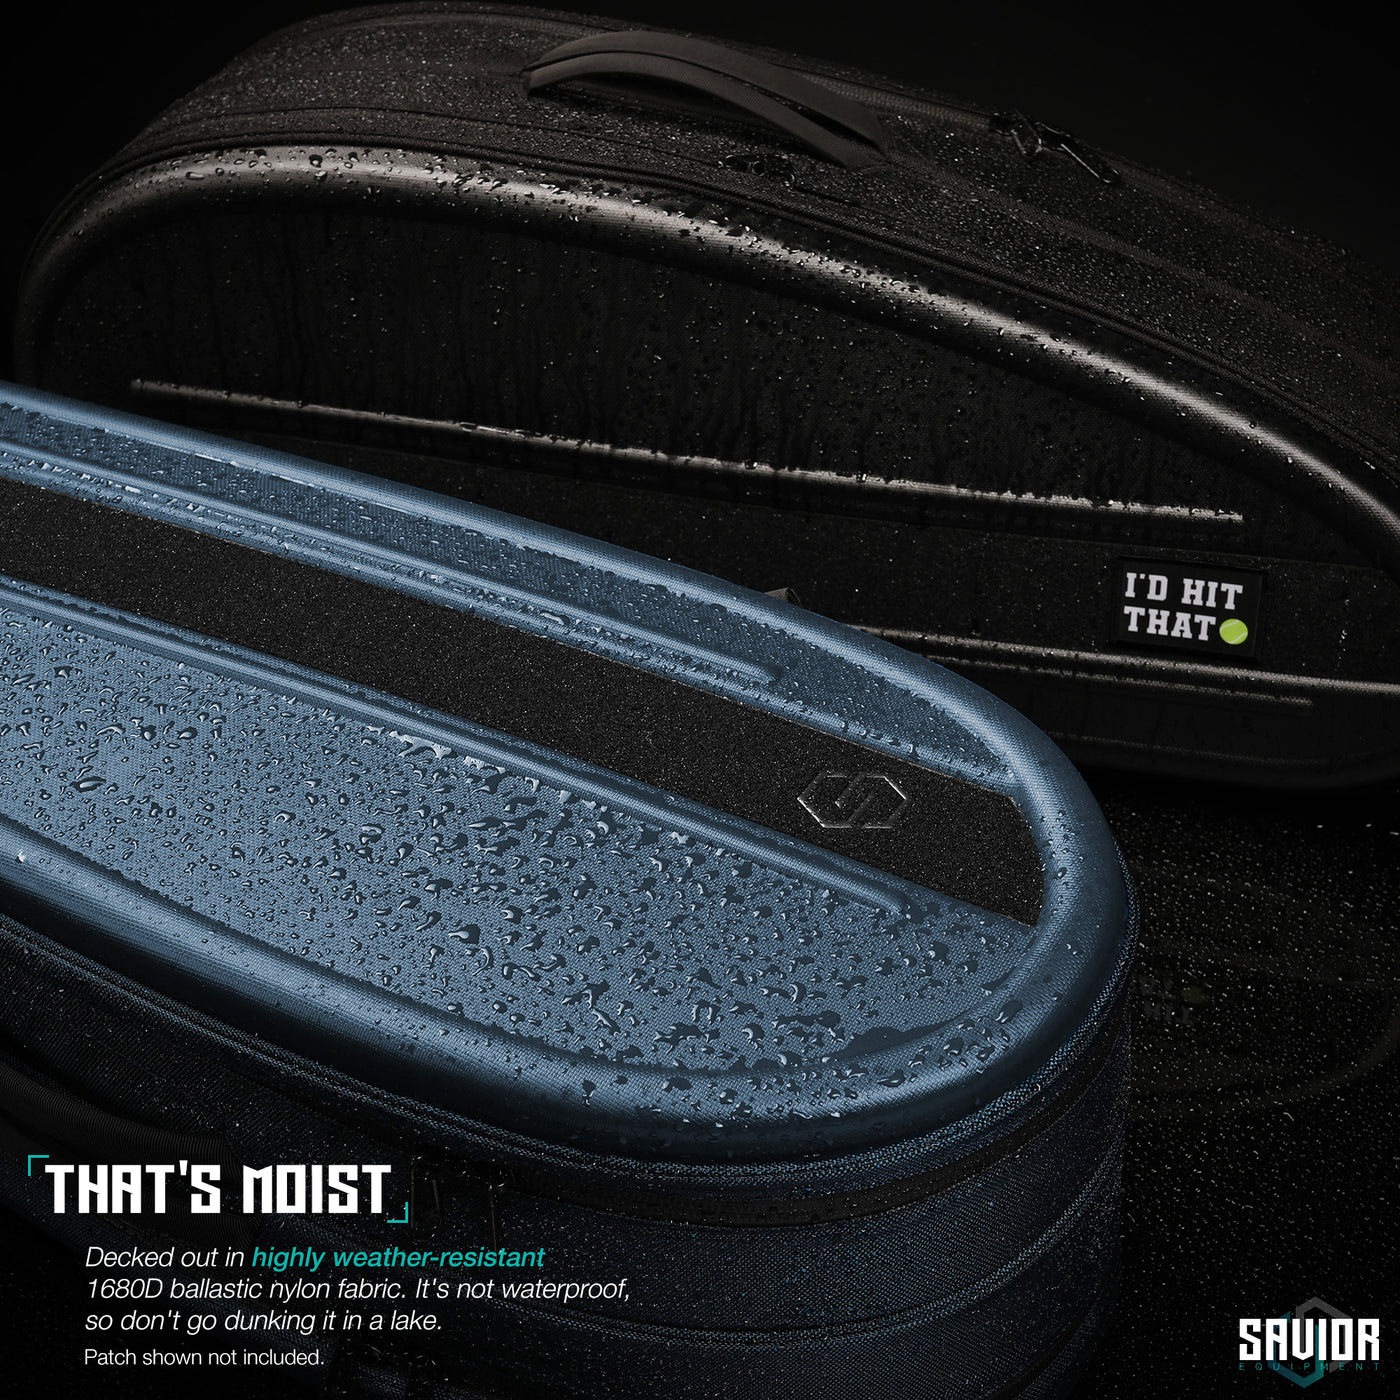 That’s Moist - Decked out in 1680D ballistic nylon fabric, this case is highly weather-resistant. It’s not waterproof, so don’t go dunking it in a lake. Patch shown not included.